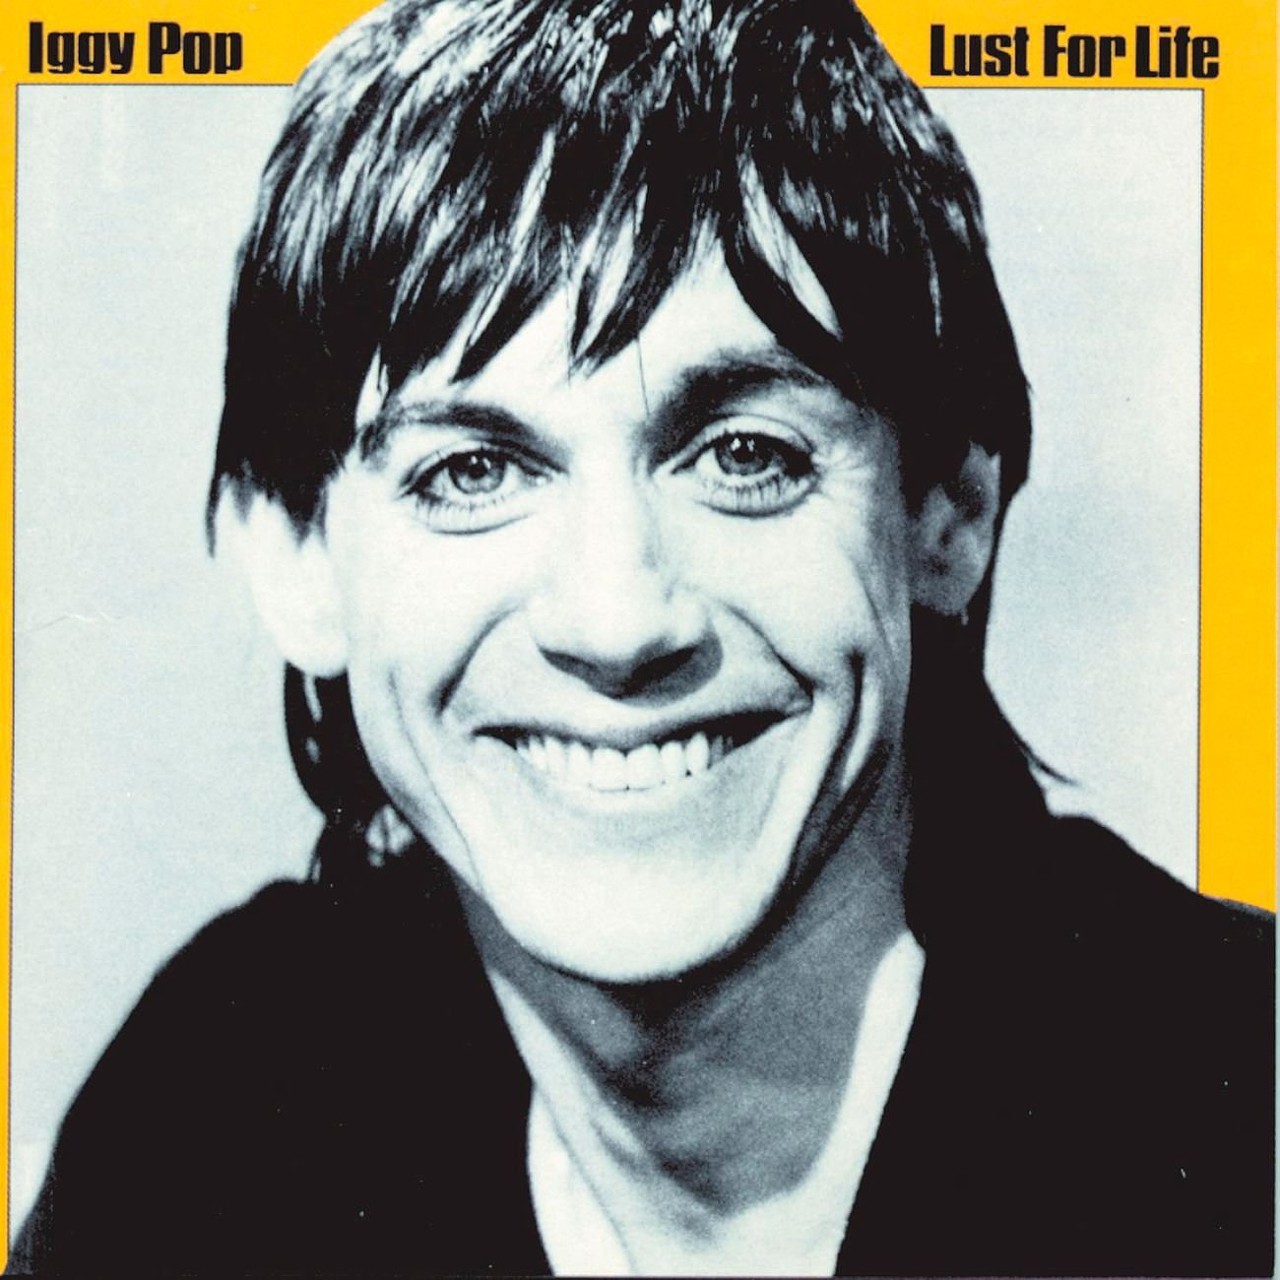 7. &#147;Lust for Life&#148;
We&#146;ve all heard this so many times, in movies, and TV commercials, and on our own listening devices. And yet, we&#146;re still not sick of it! We will all dance like the devil when that bass line starts.
(Photo: original cover art to the LP &#145;Lust For Life.&#146;)